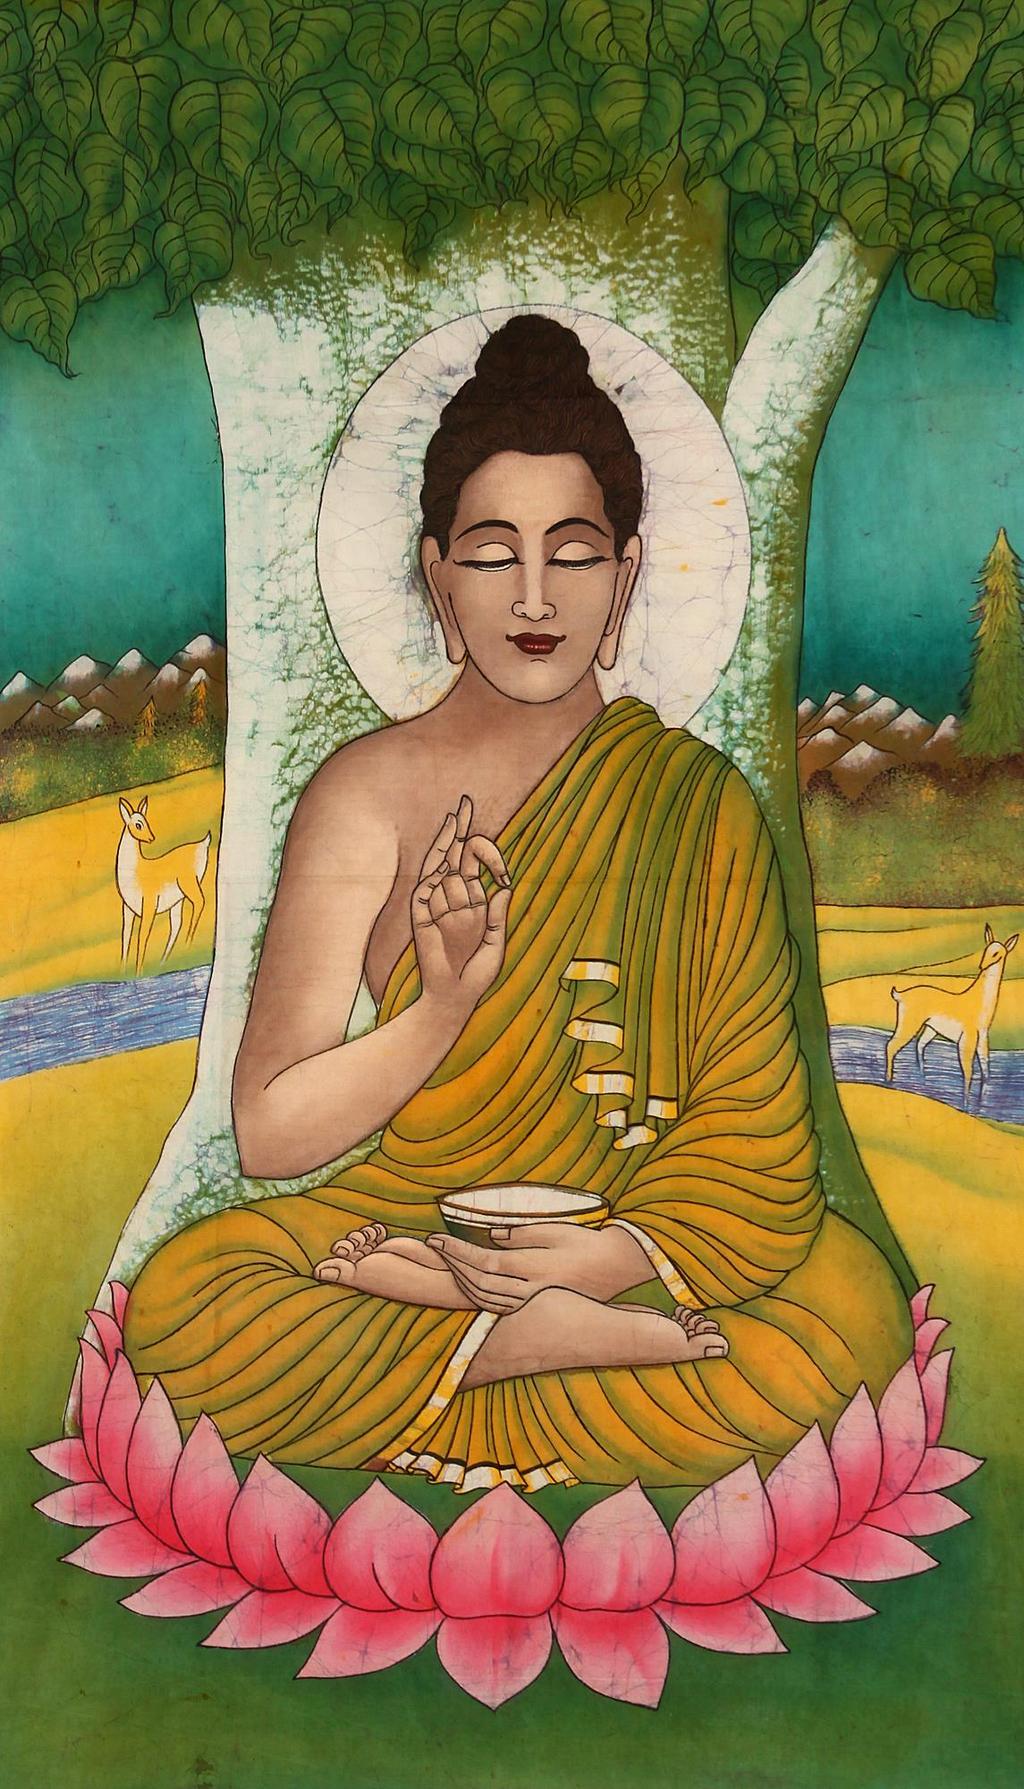 What Buddha taught (The Four Noble Truths): To Live is to Suffer Suffering is Caused by Desire One can